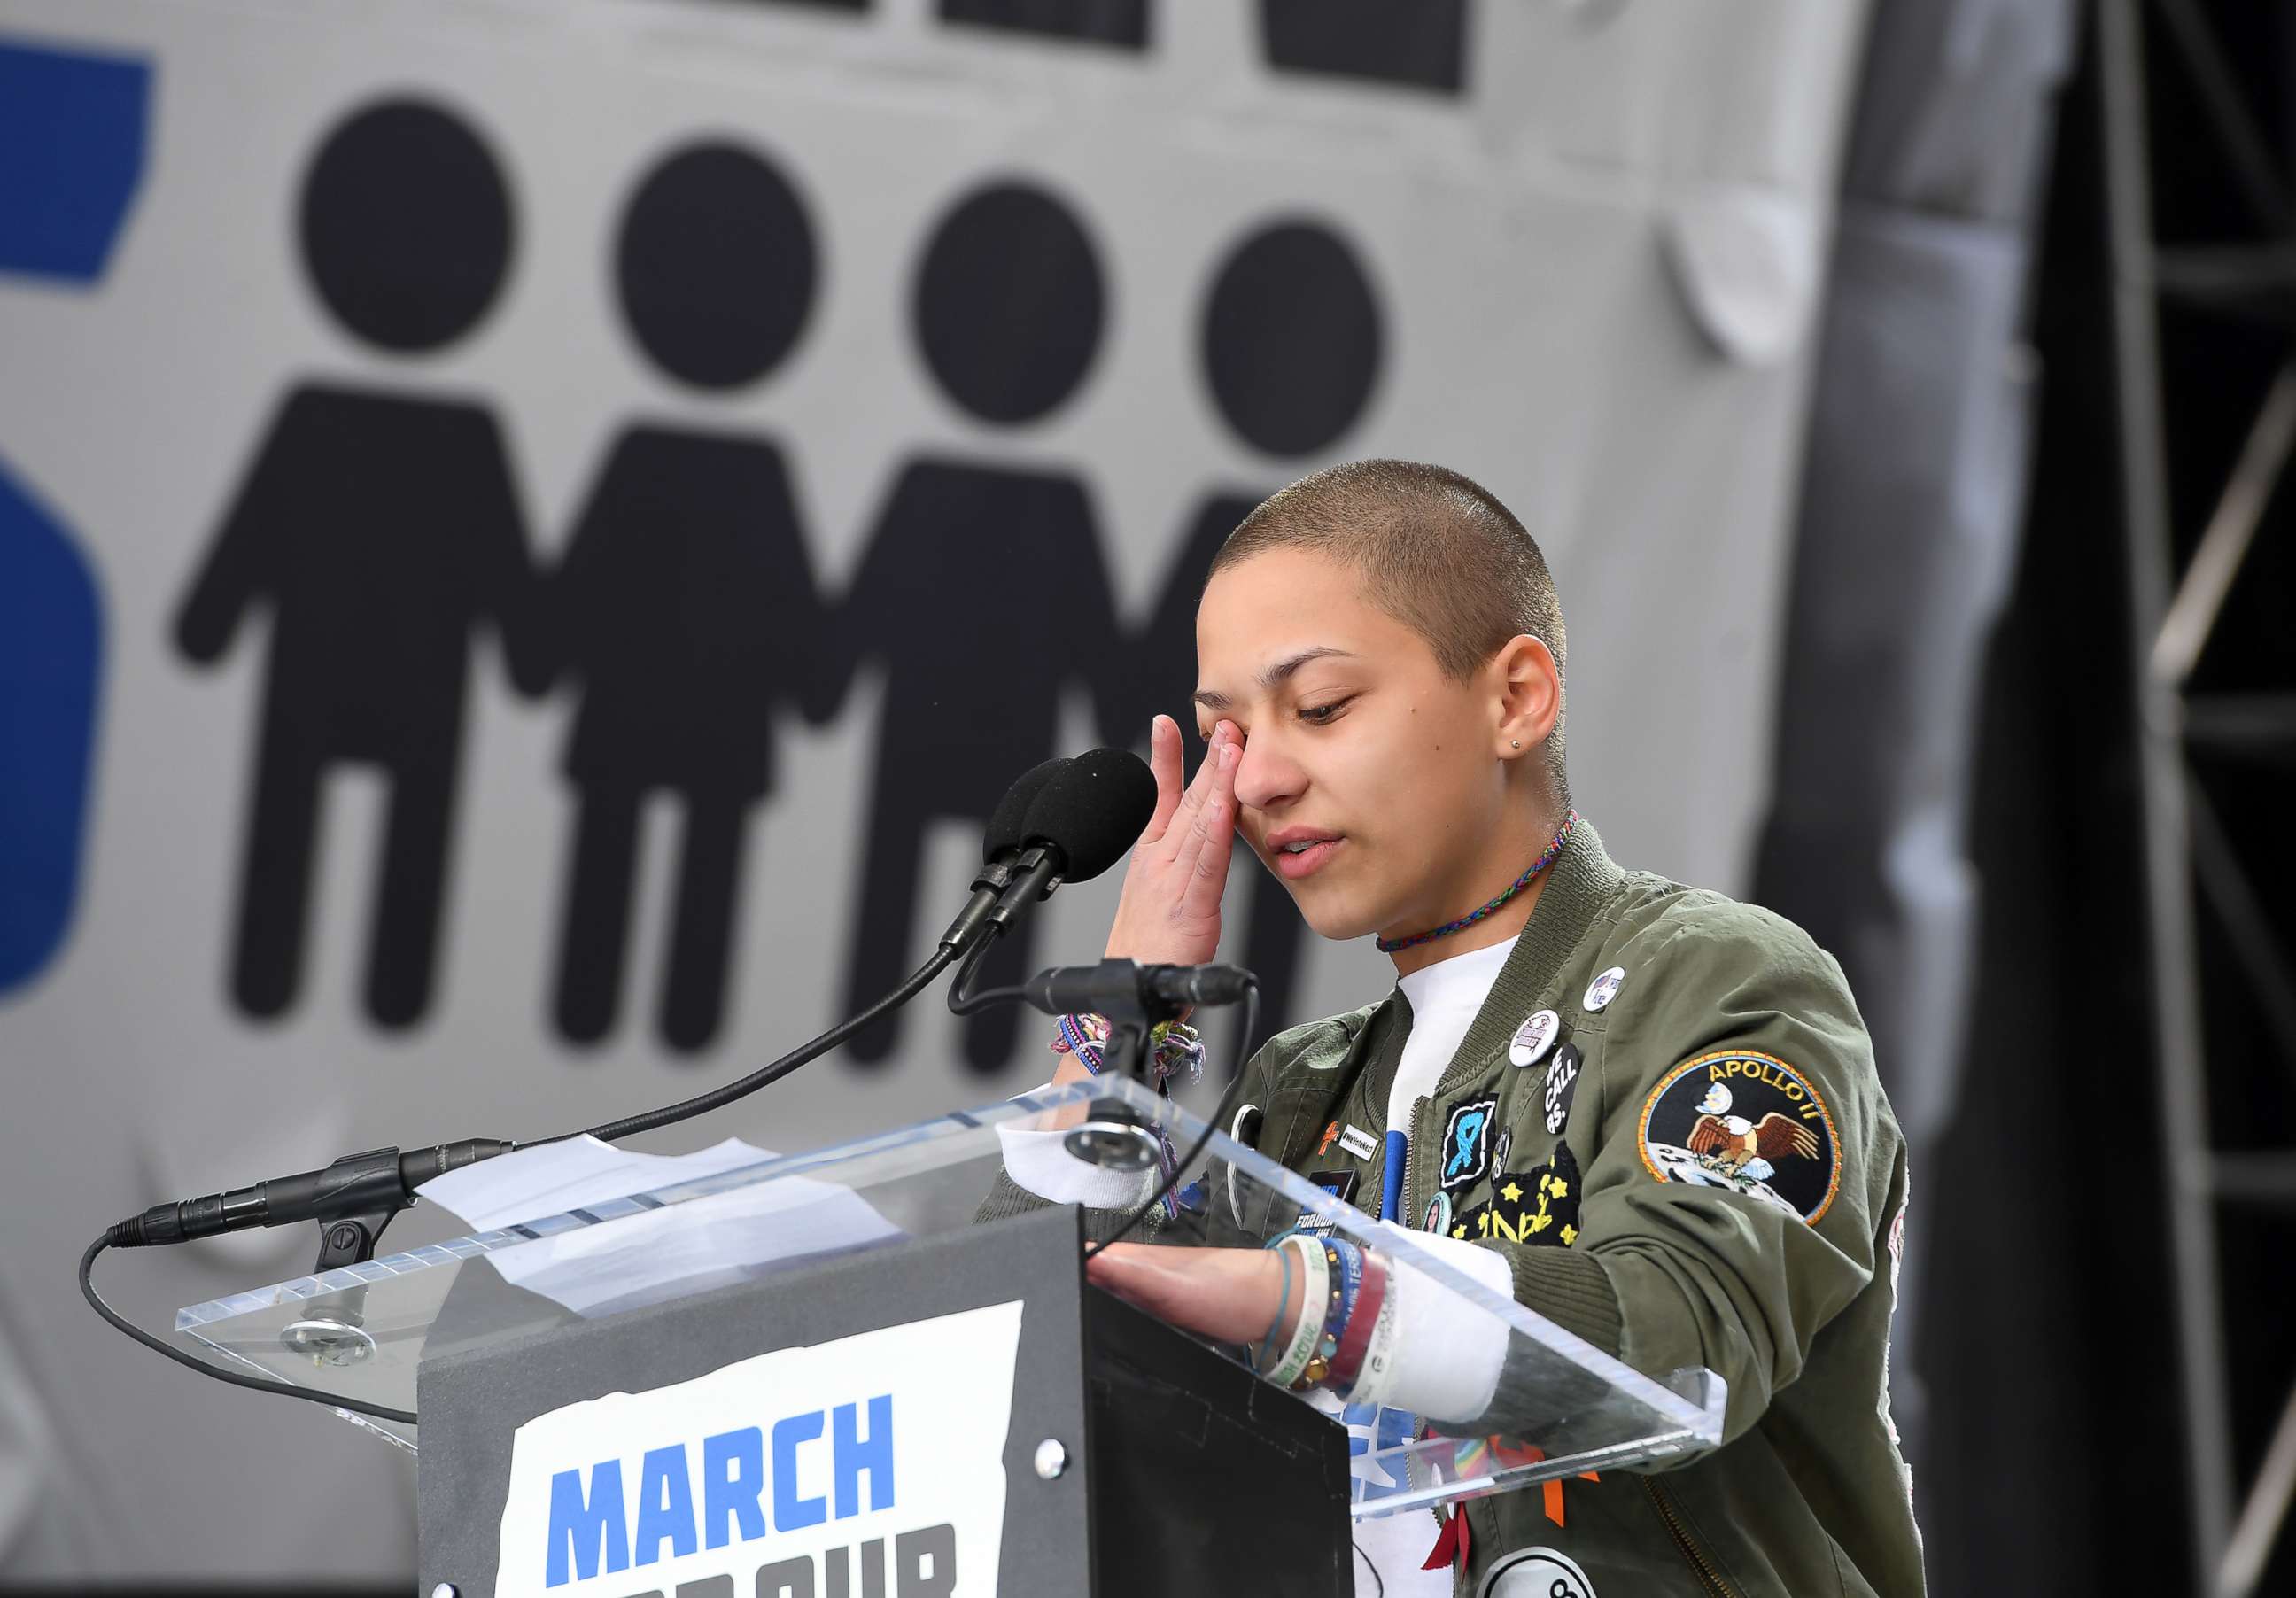 PHOTO: Marjory Stoneman Douglas High School student, Emma Gonzalez, speaks during March for Our Lives, March 24, 2018, in Washington, DC.